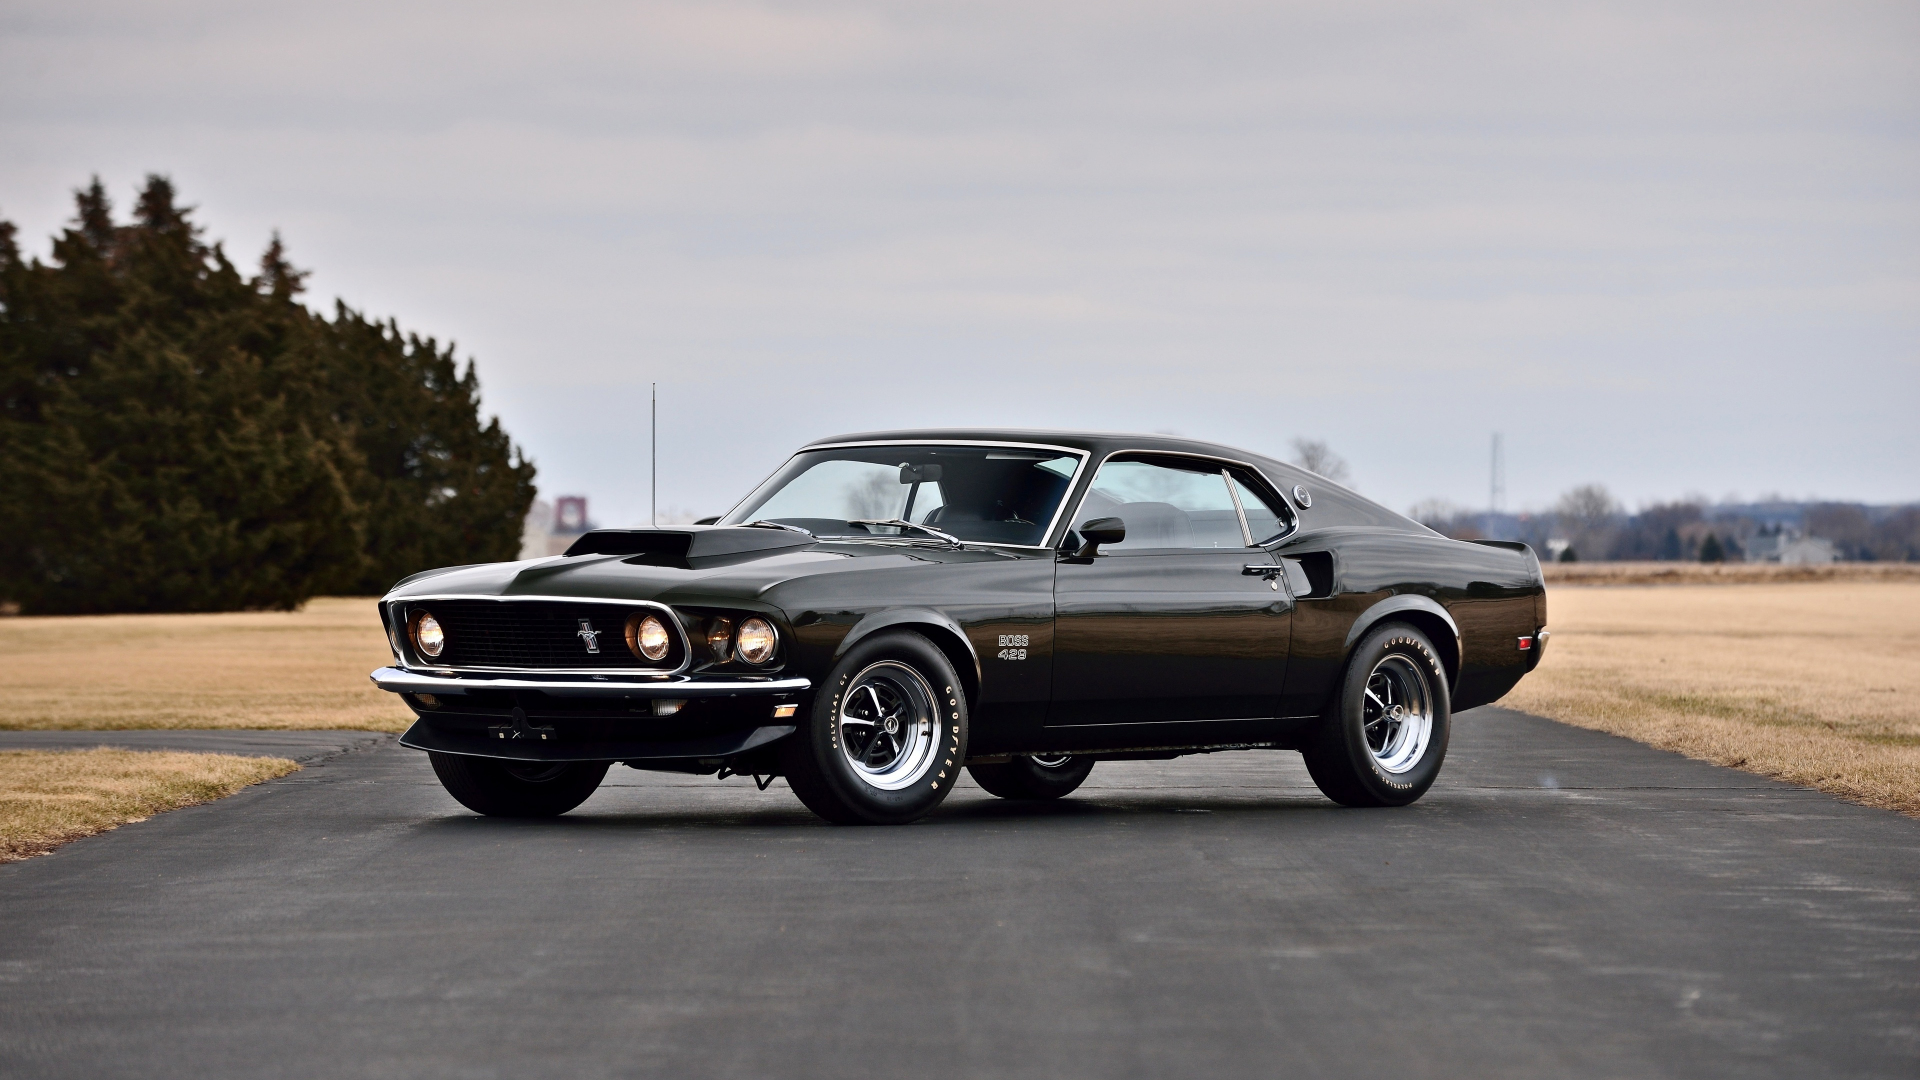 Download wallpaper 1920x1080 on road, 1969 ford mustang boss 429, black ...